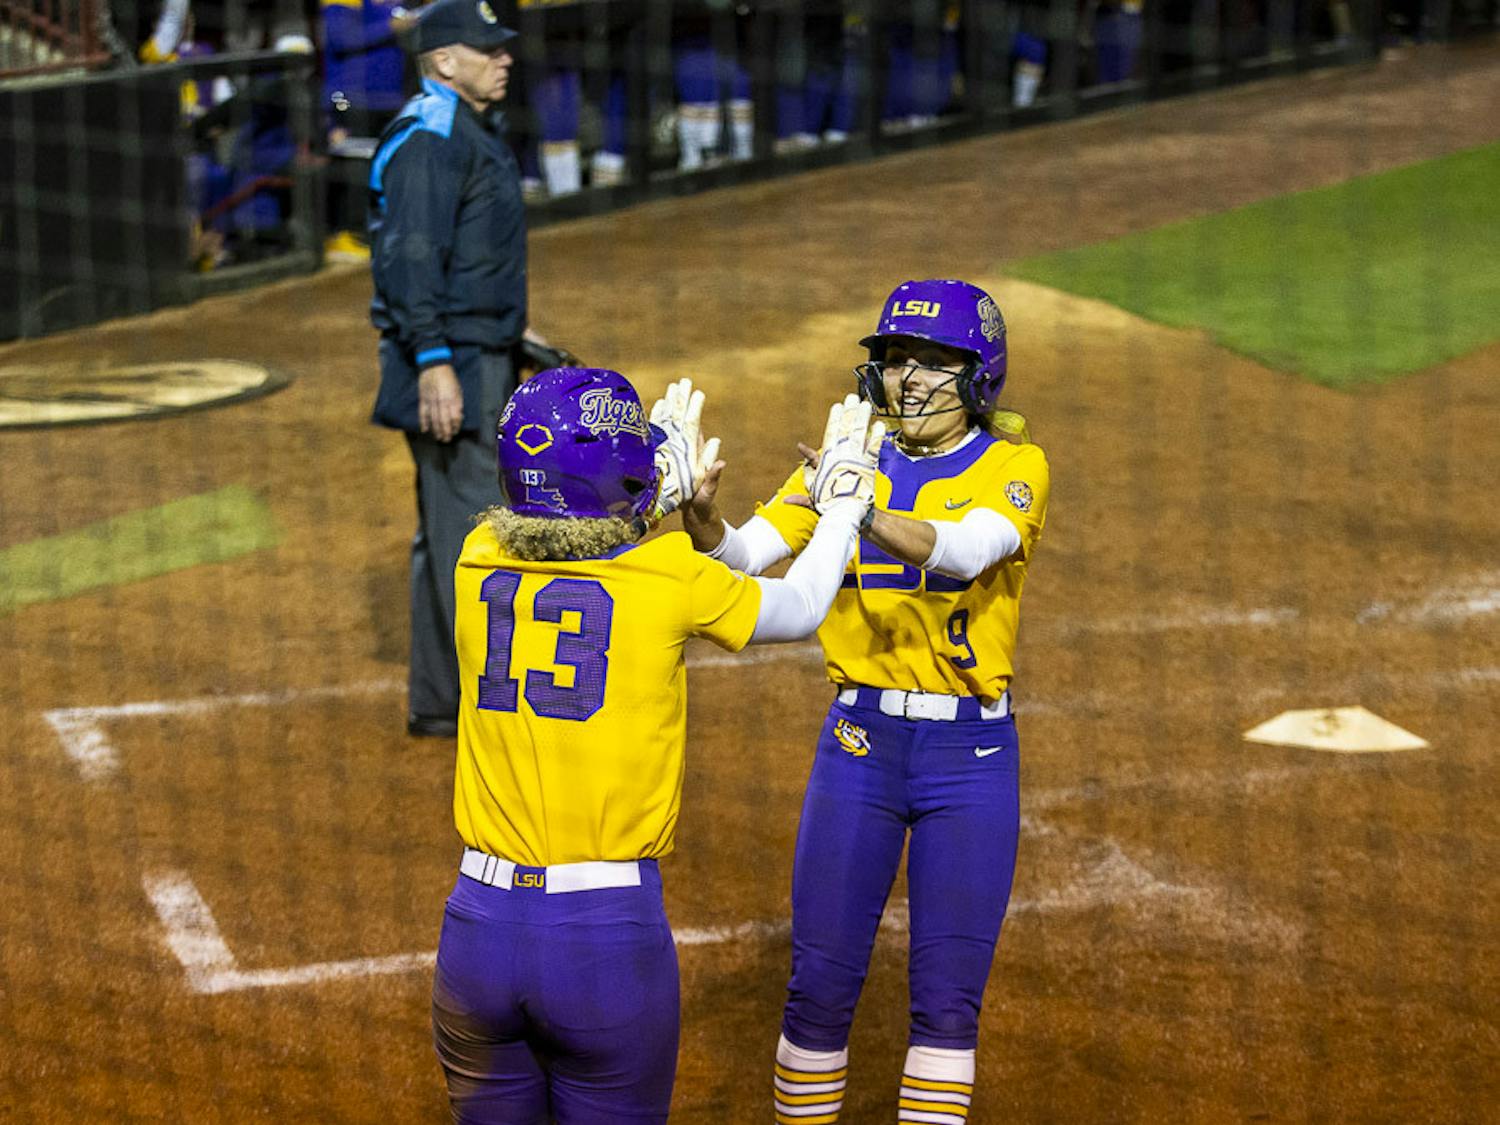 LSU junior infielder Danieca Coffey (left) and sophomore outfielder Madilyn Giglio (right) celebrate after making two RBIs due to an error on South Carolina's offense during the second inning during game two of the doubleheader on March 13, 2023. The Tigers beat the Gamecocks 5-1 at Beckham Field in the second game of the night.&nbsp;